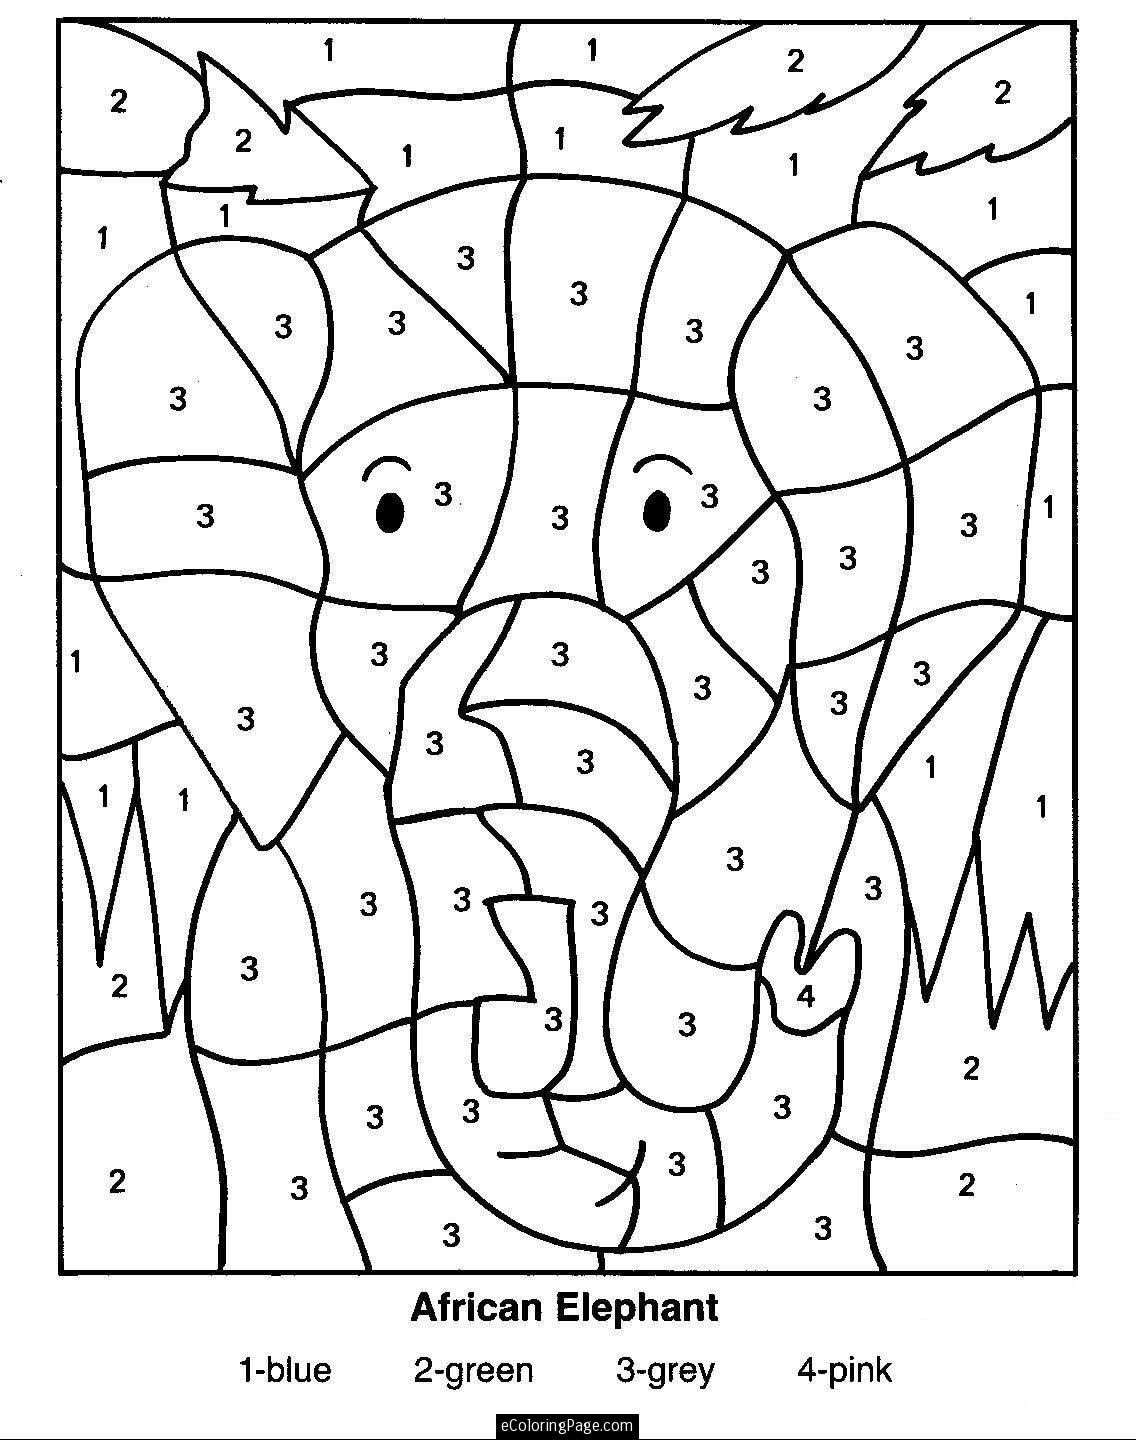 Anatomy Coloring Pages For Education - Coloring Pages For All Ages